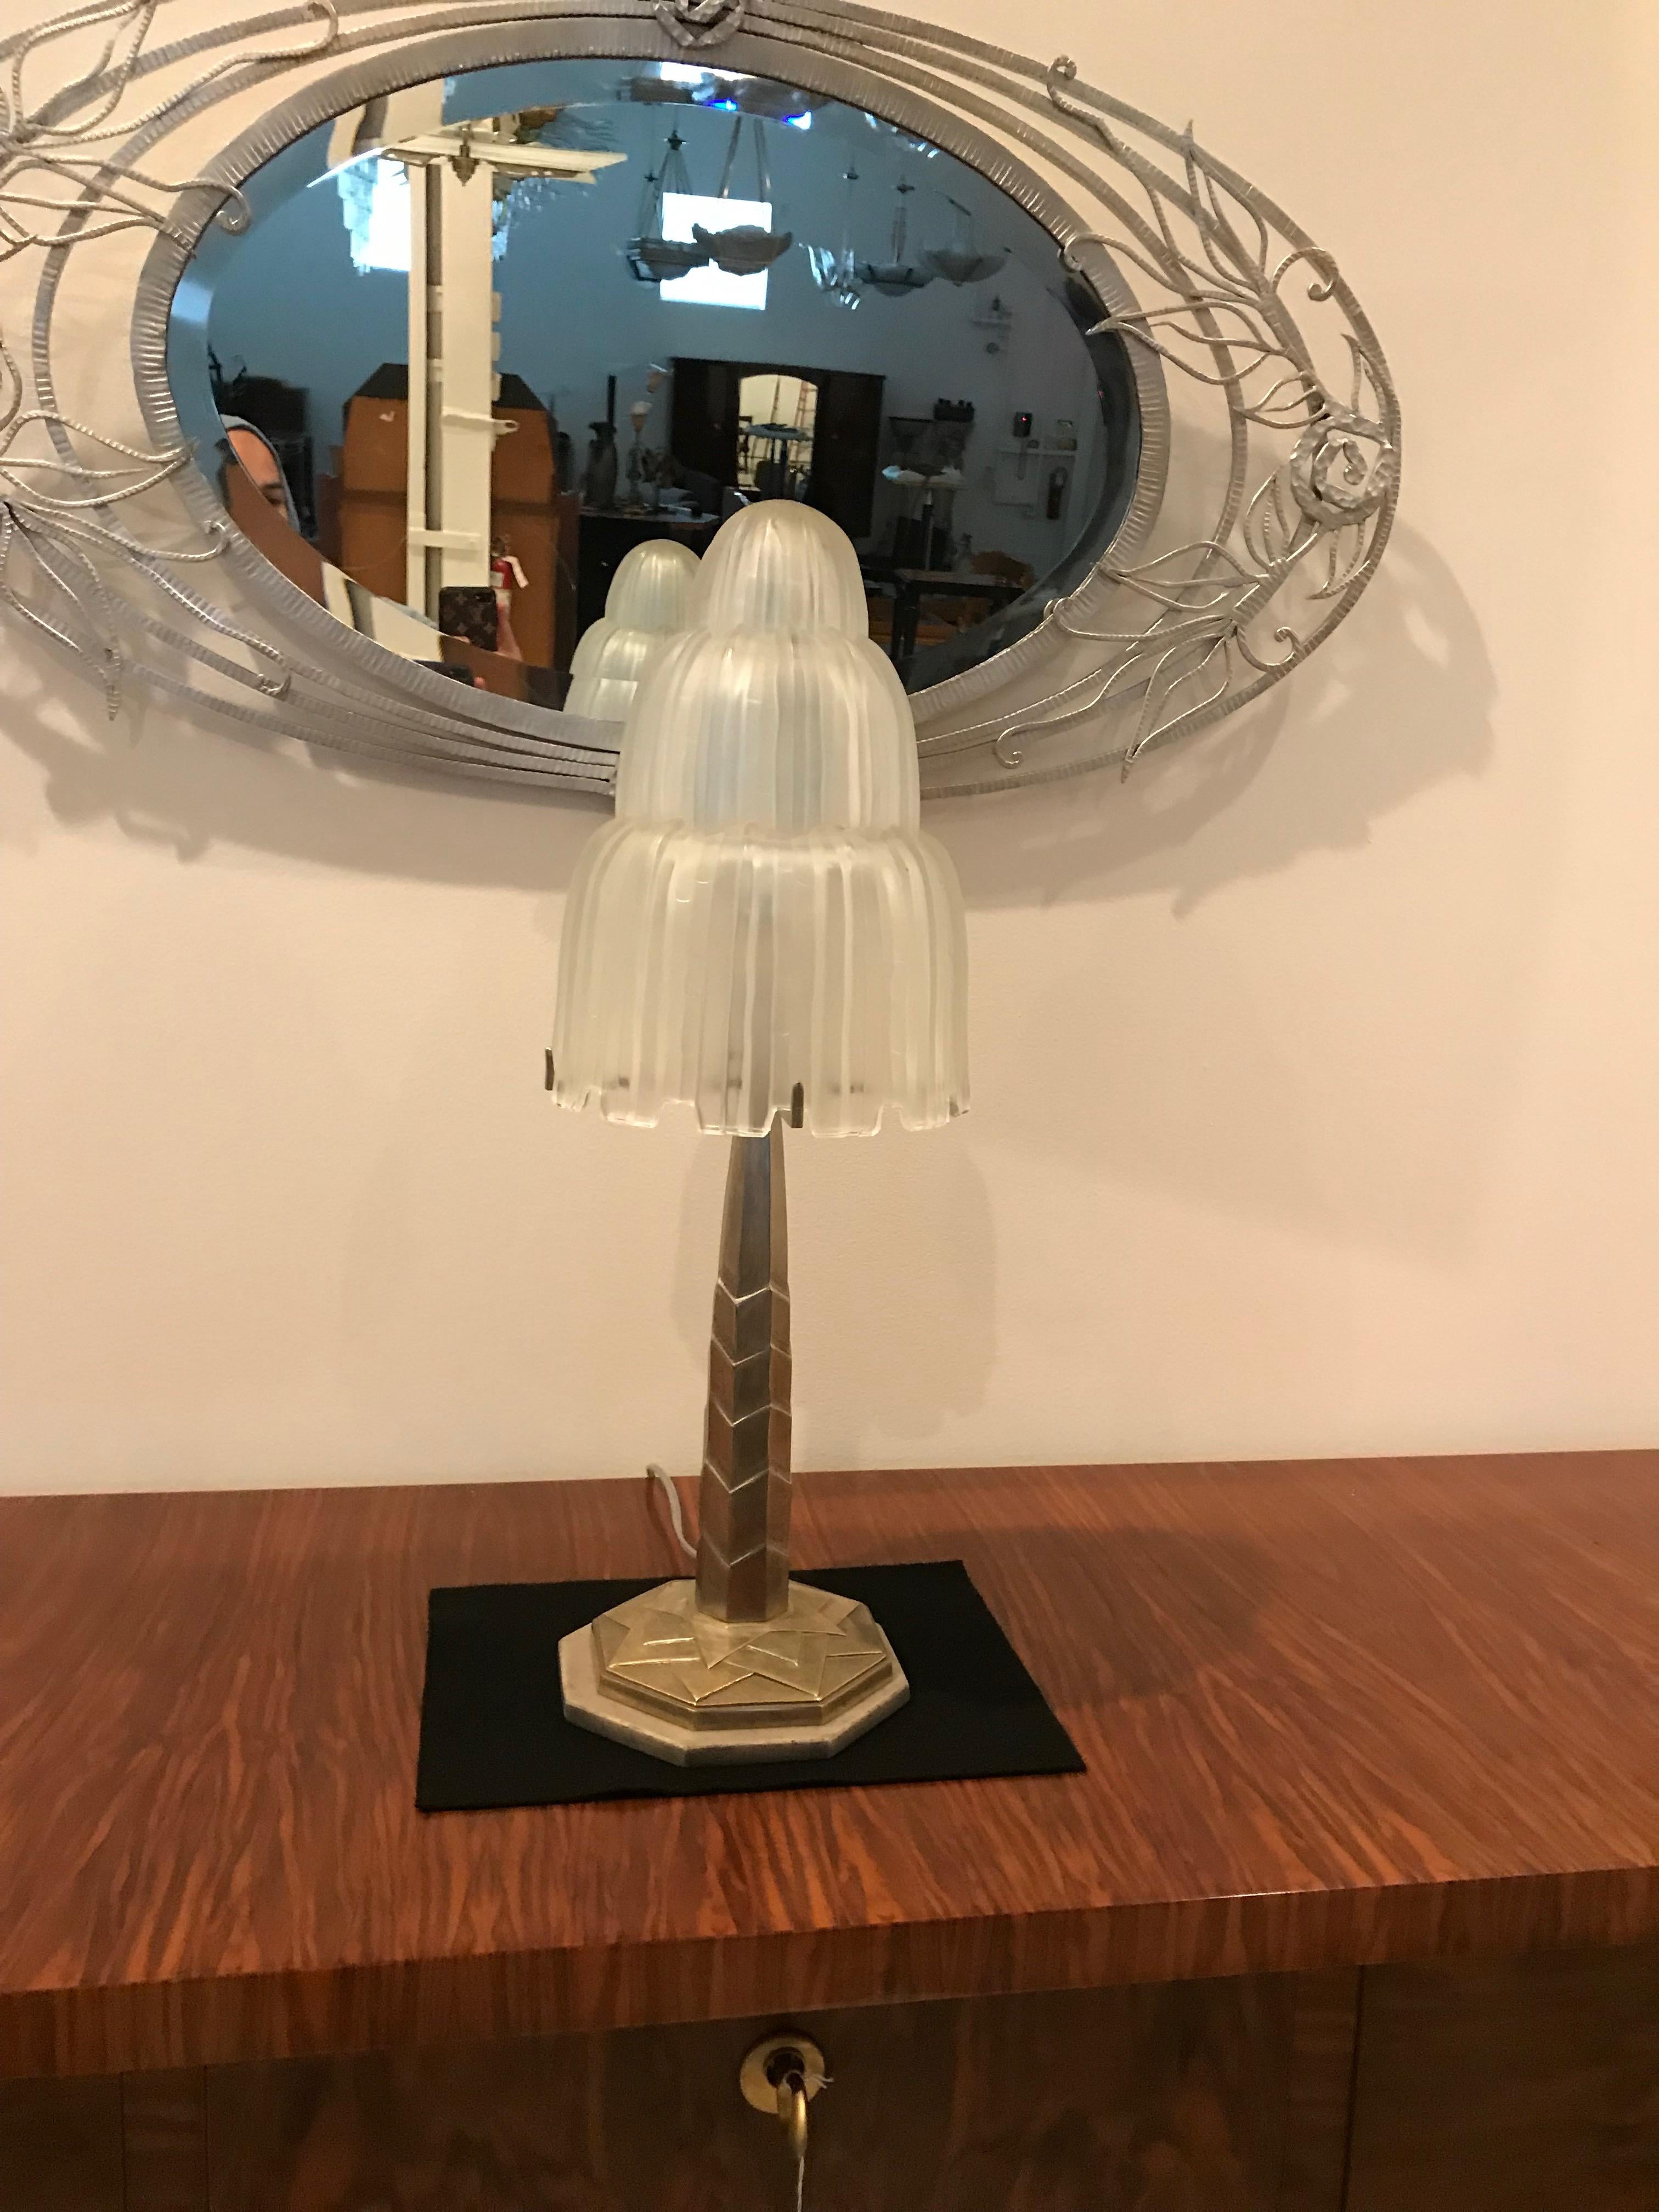 French Art Deco table lamp created by Marius Ernest Sabino. The shade is clear frosted glass with polished details referred to as the 